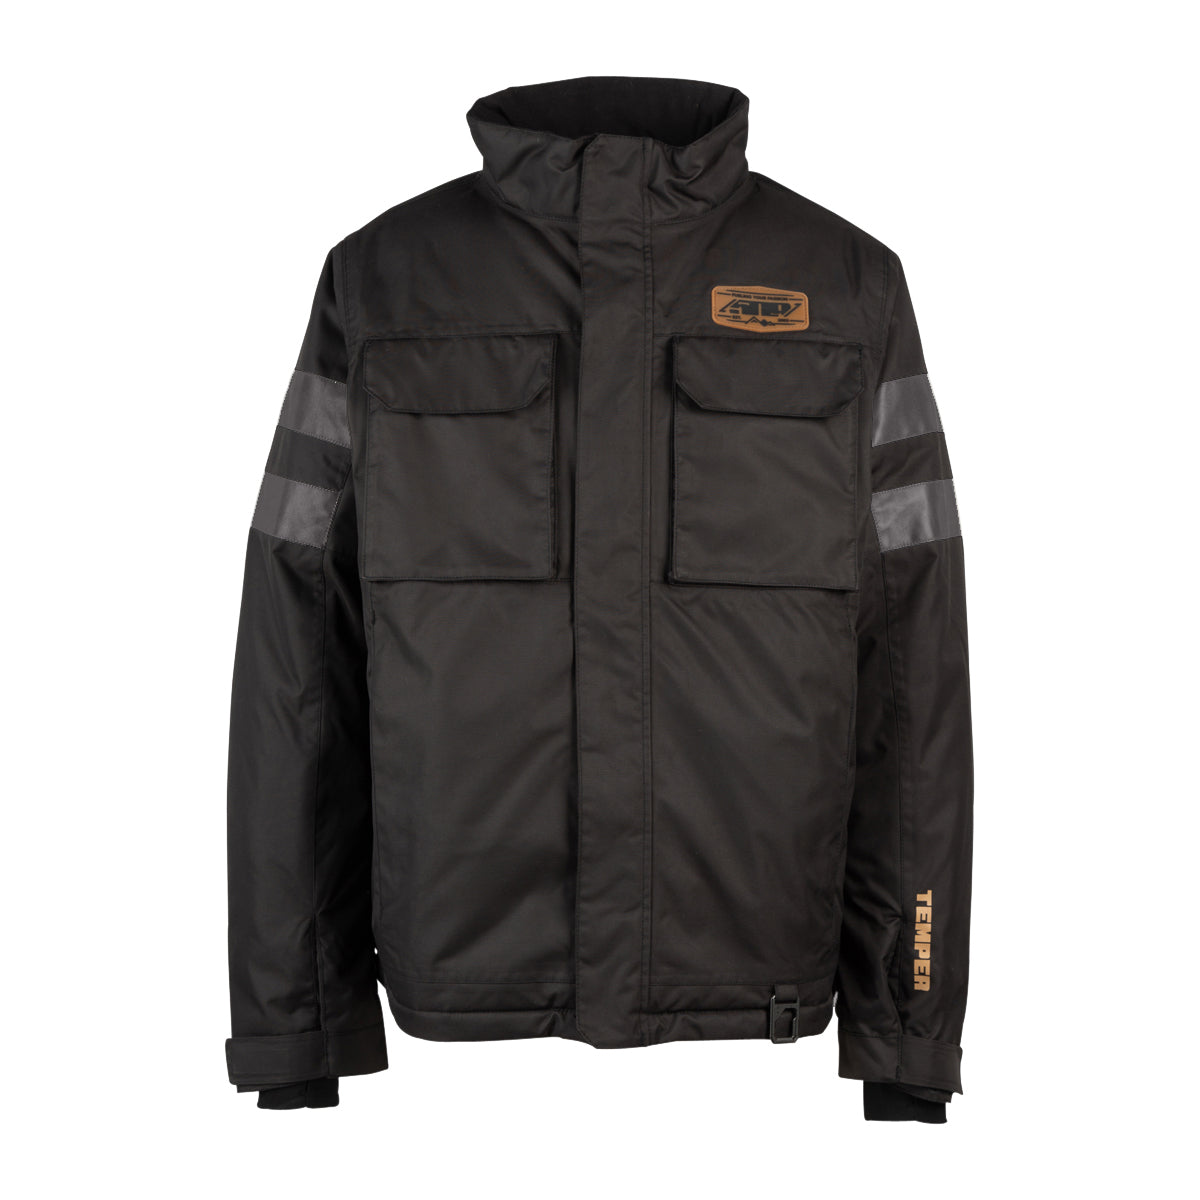 Temper Insulated Jacket